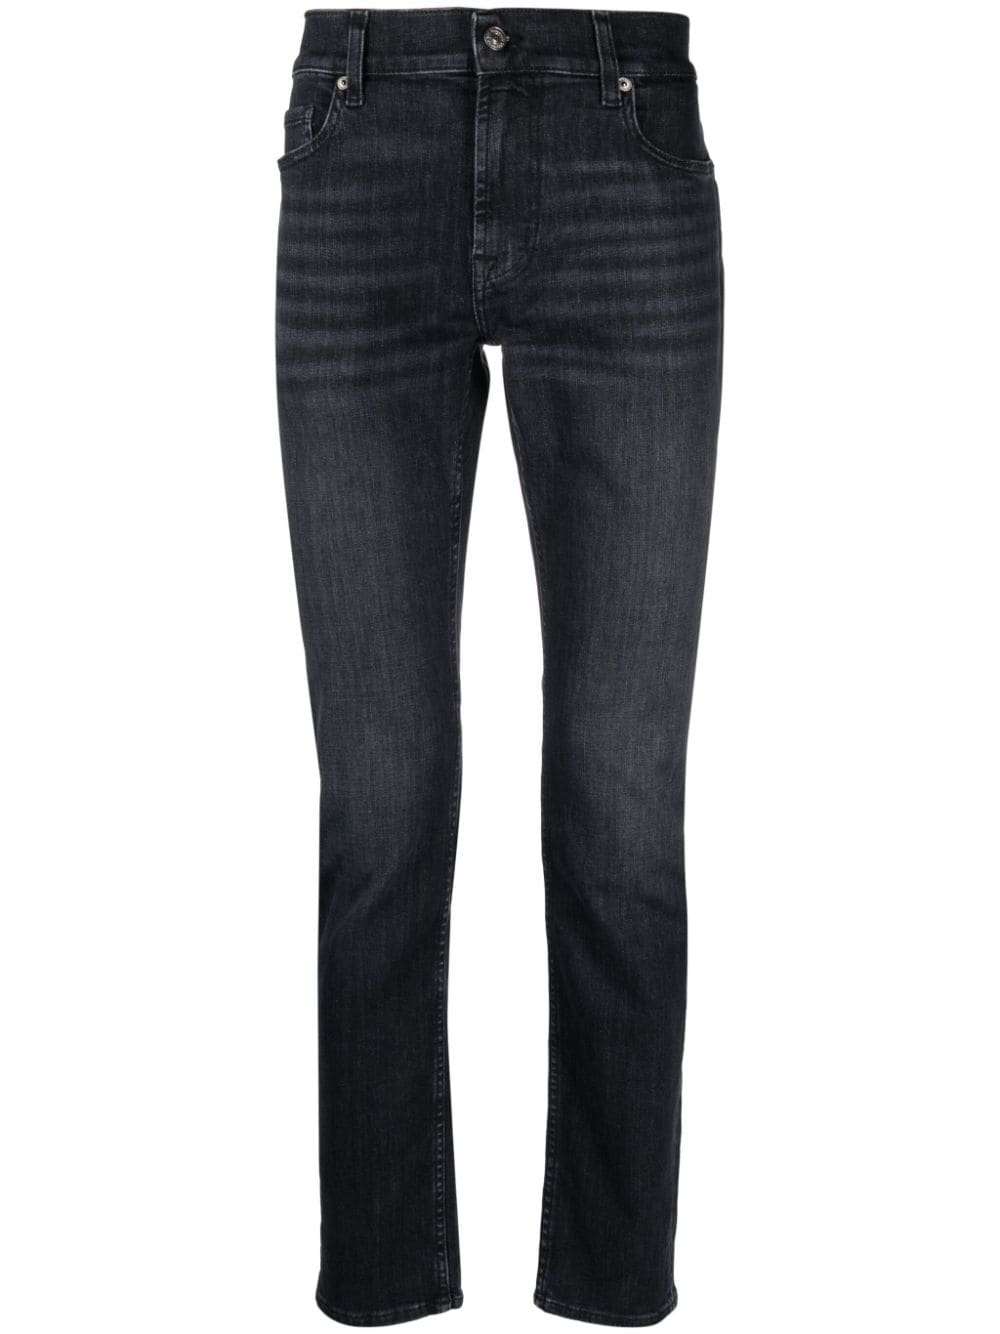 7 For All Mankind Paxtyn mid-rise skinny jeans - Black von 7 For All Mankind